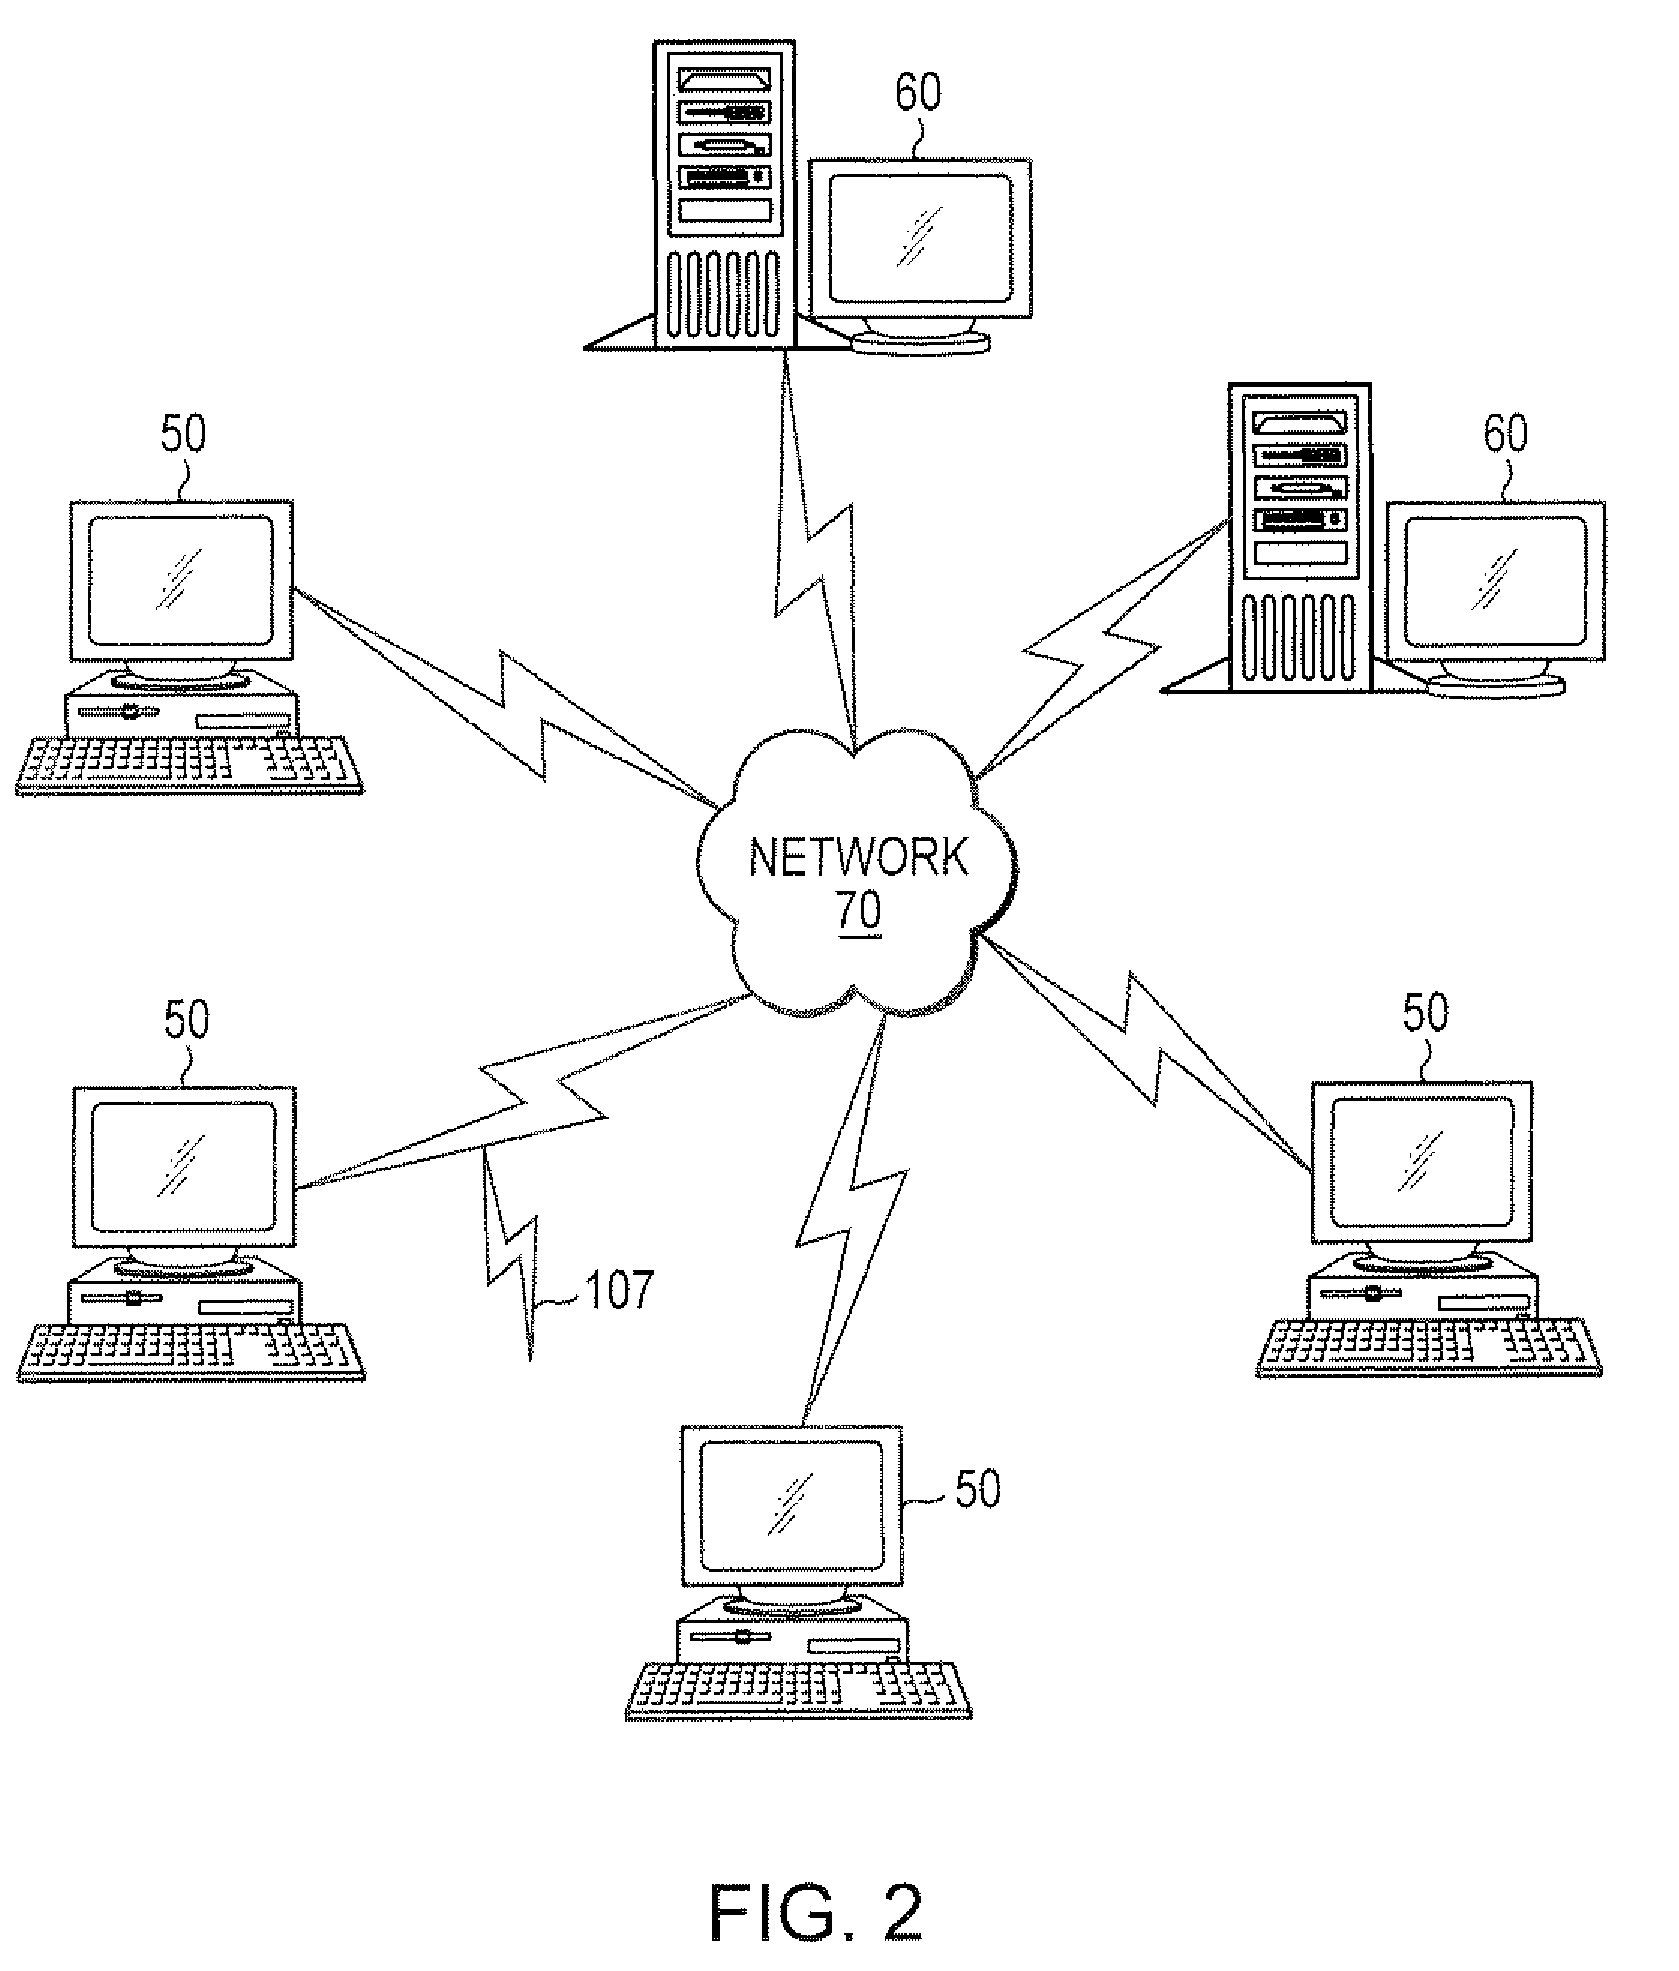 Computer method and apparatus for software configuration management repository interoperation